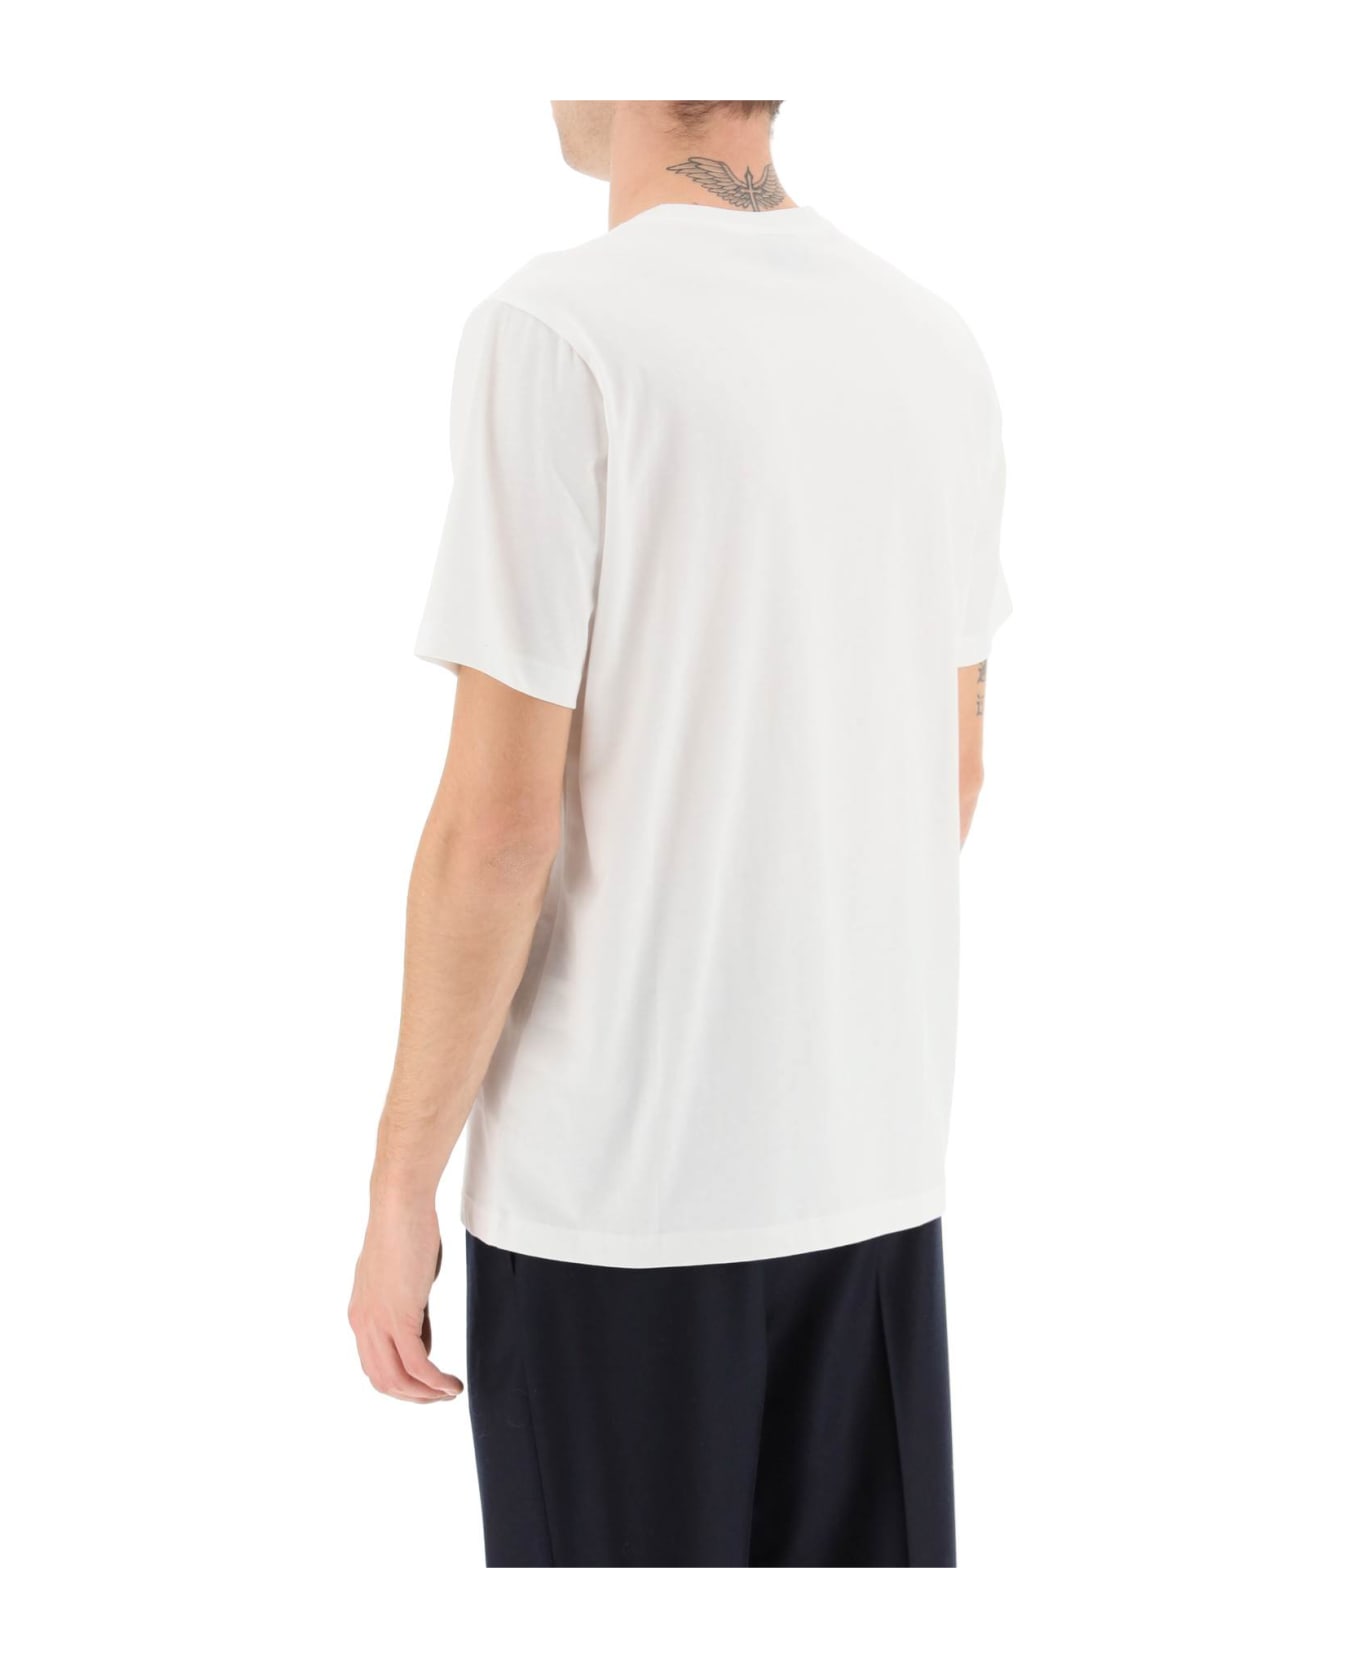 PS by Paul Smith Organic Cotton T-shirt - White